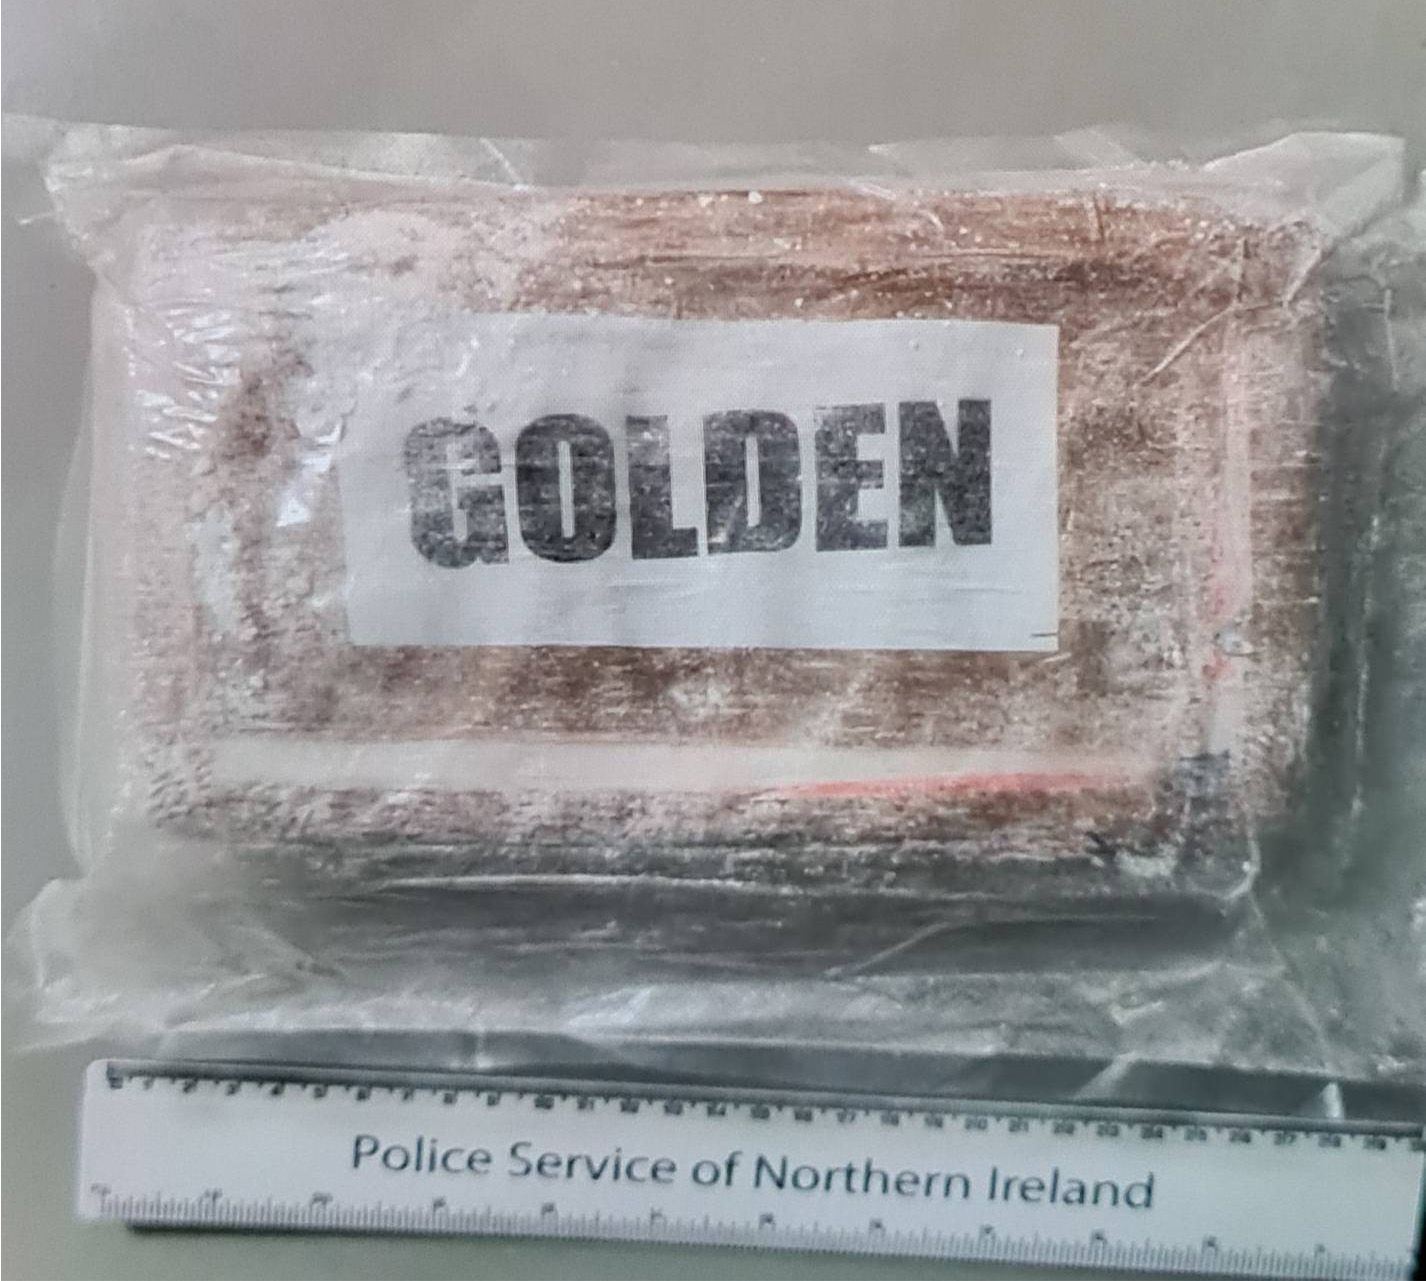 SEIZURE: The quantity of cocaine discovered in the Oldpark